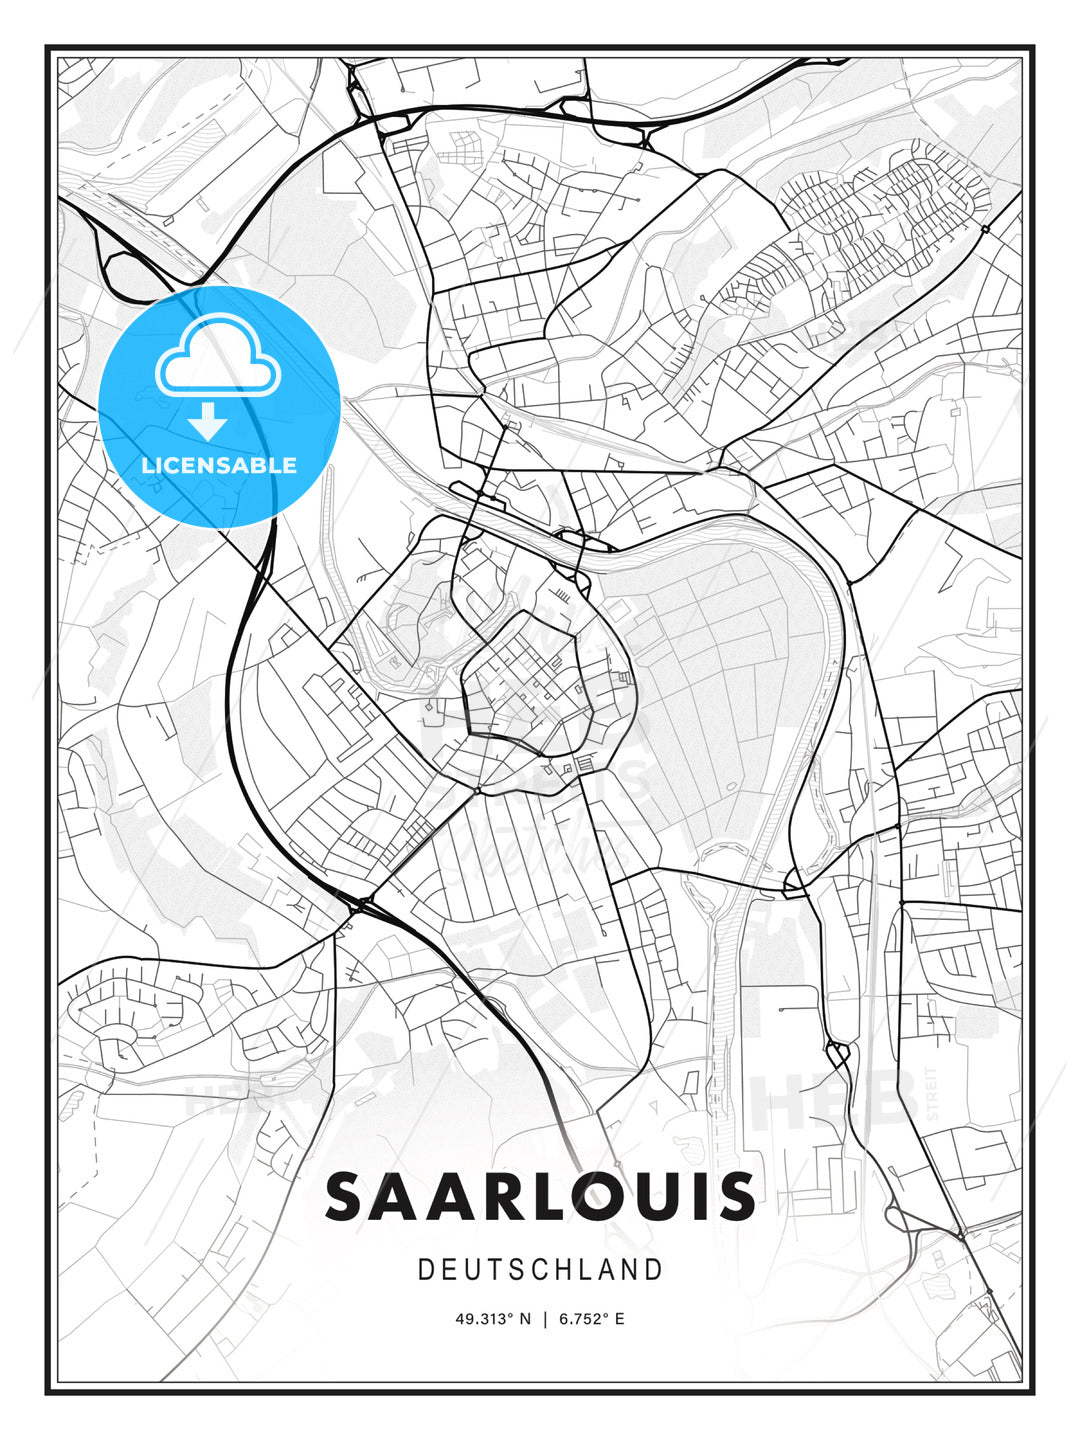 Saarlouis, Germany, Modern Print Template in Various Formats - HEBSTREITS Sketches